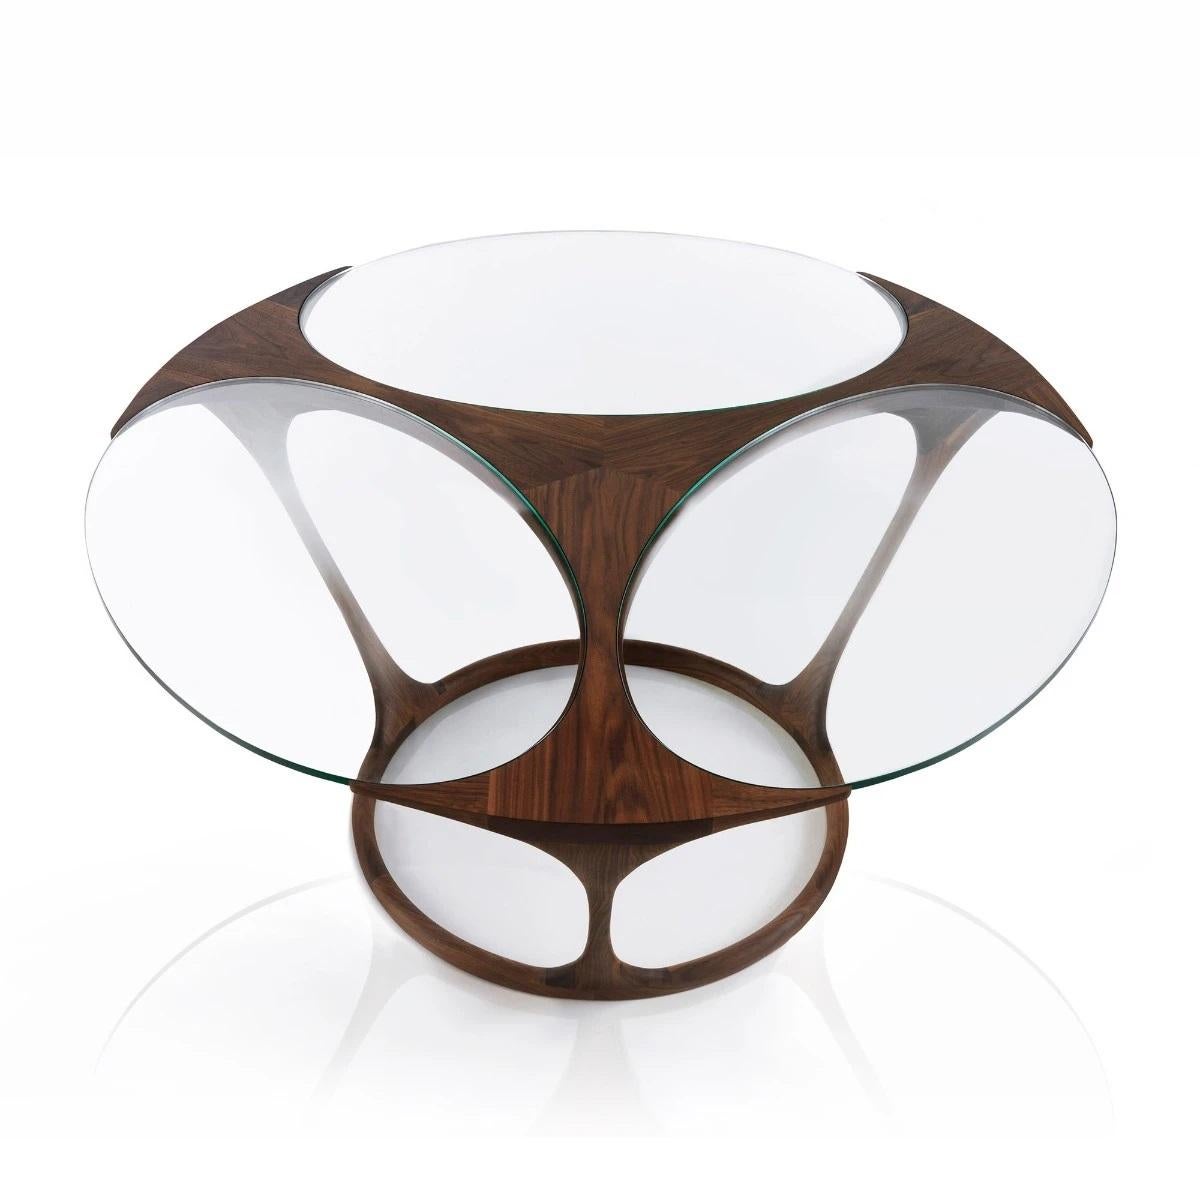 Modern Contemporary Round Dining Table with Glass Top